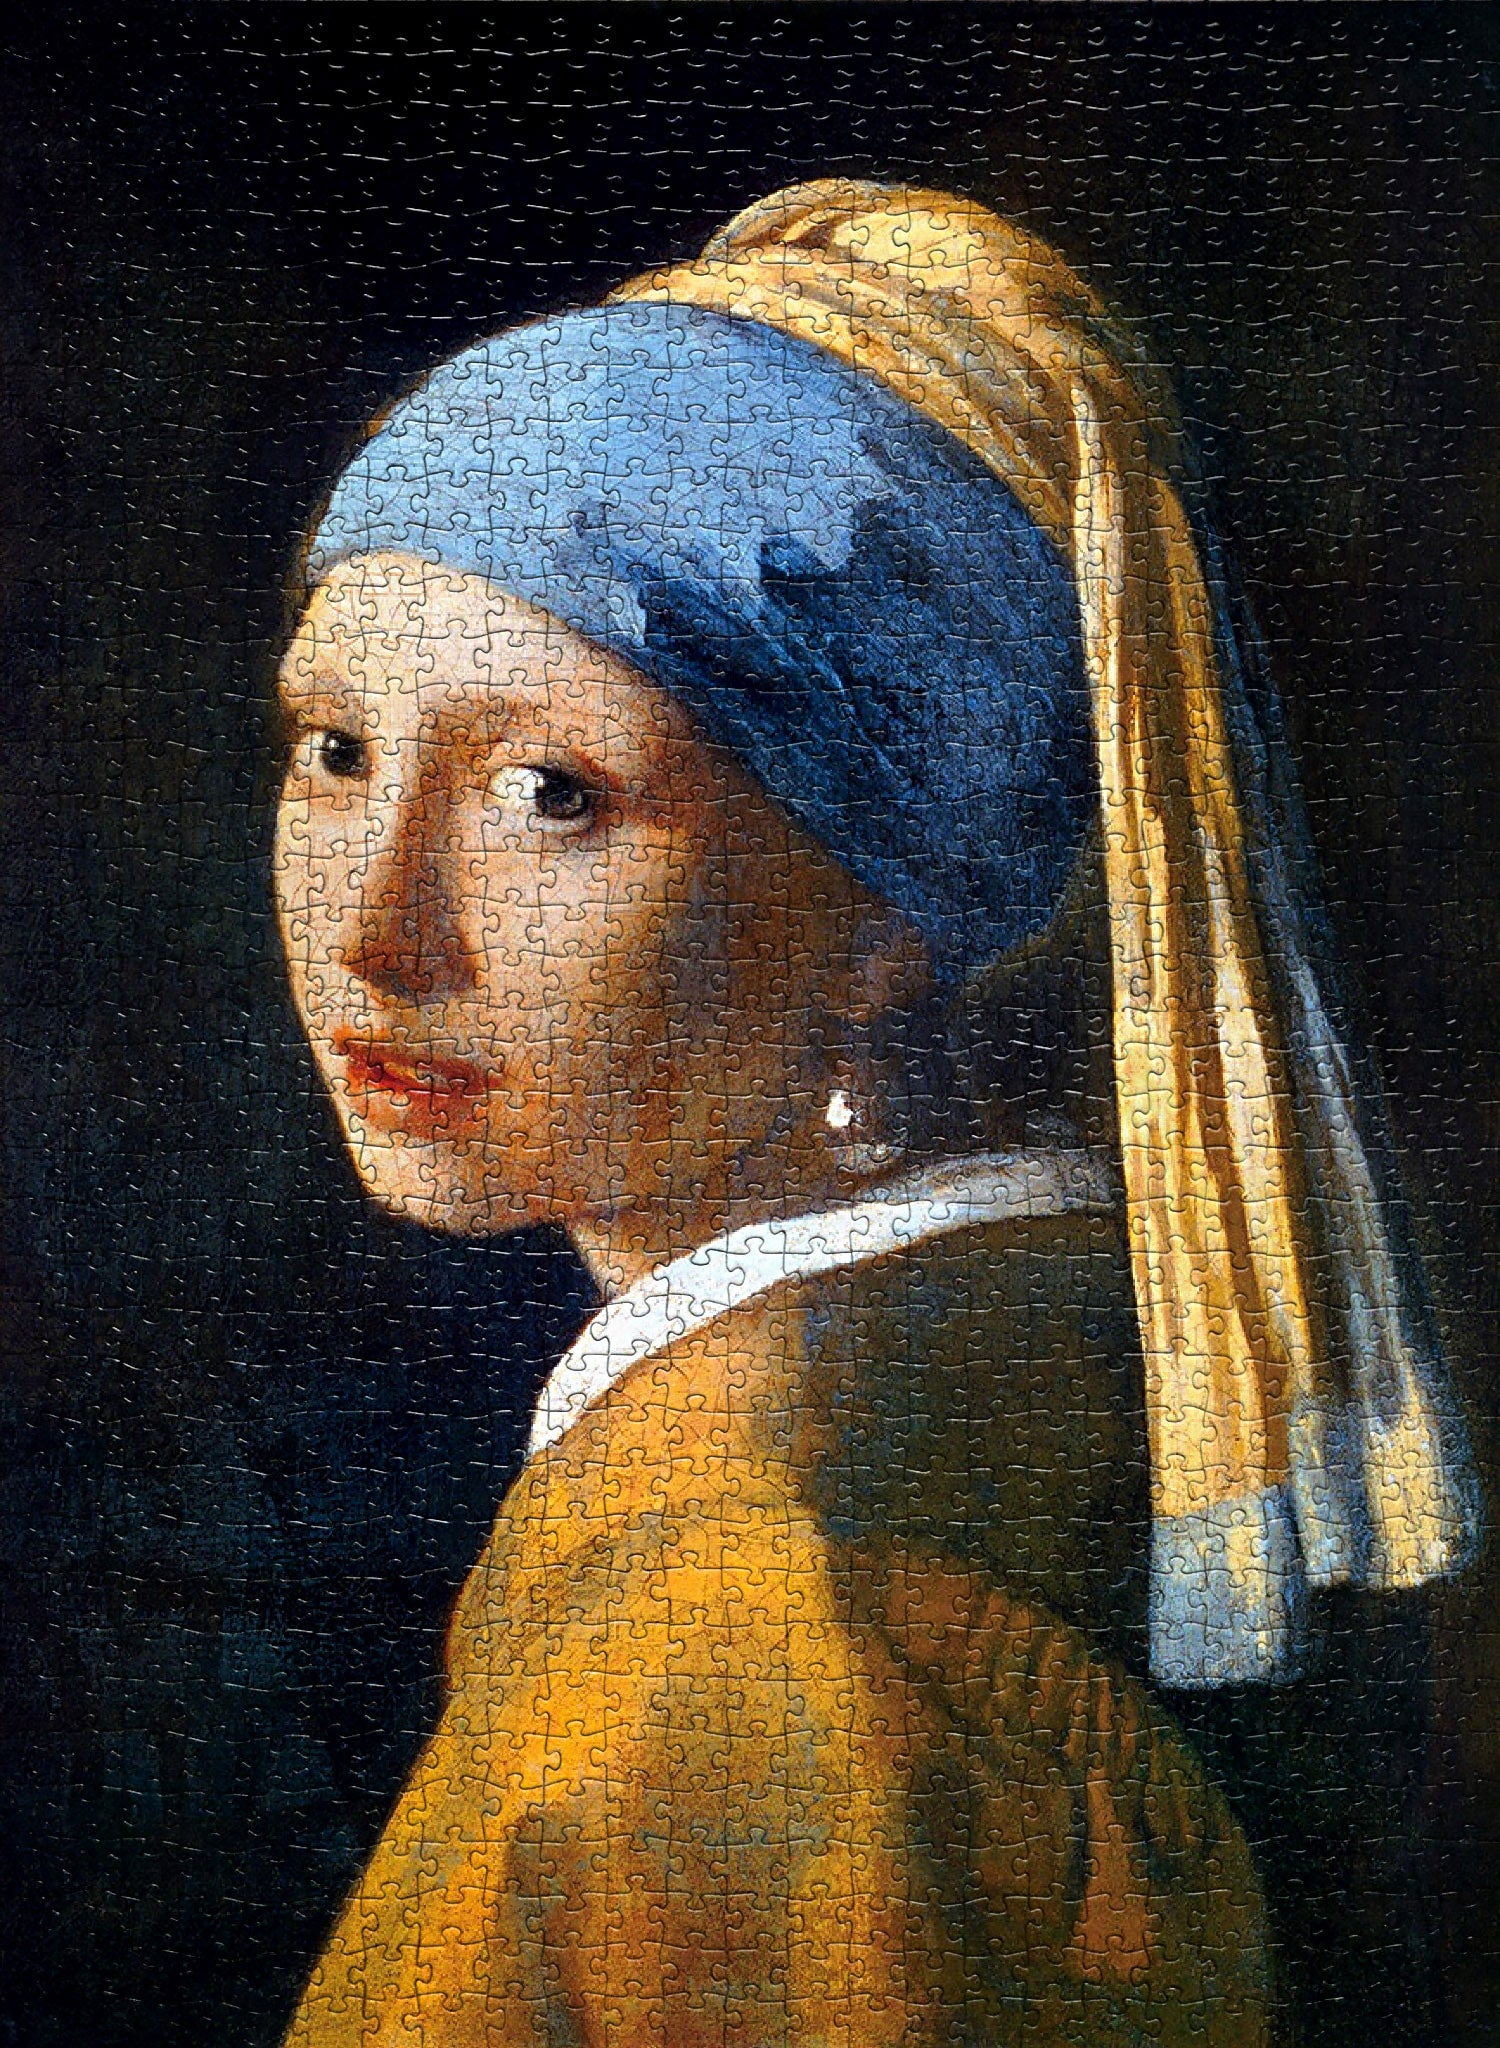 Challenging Eurographics Jigsaw Puzzle: Girl With A Pearl Earring by Vermeer